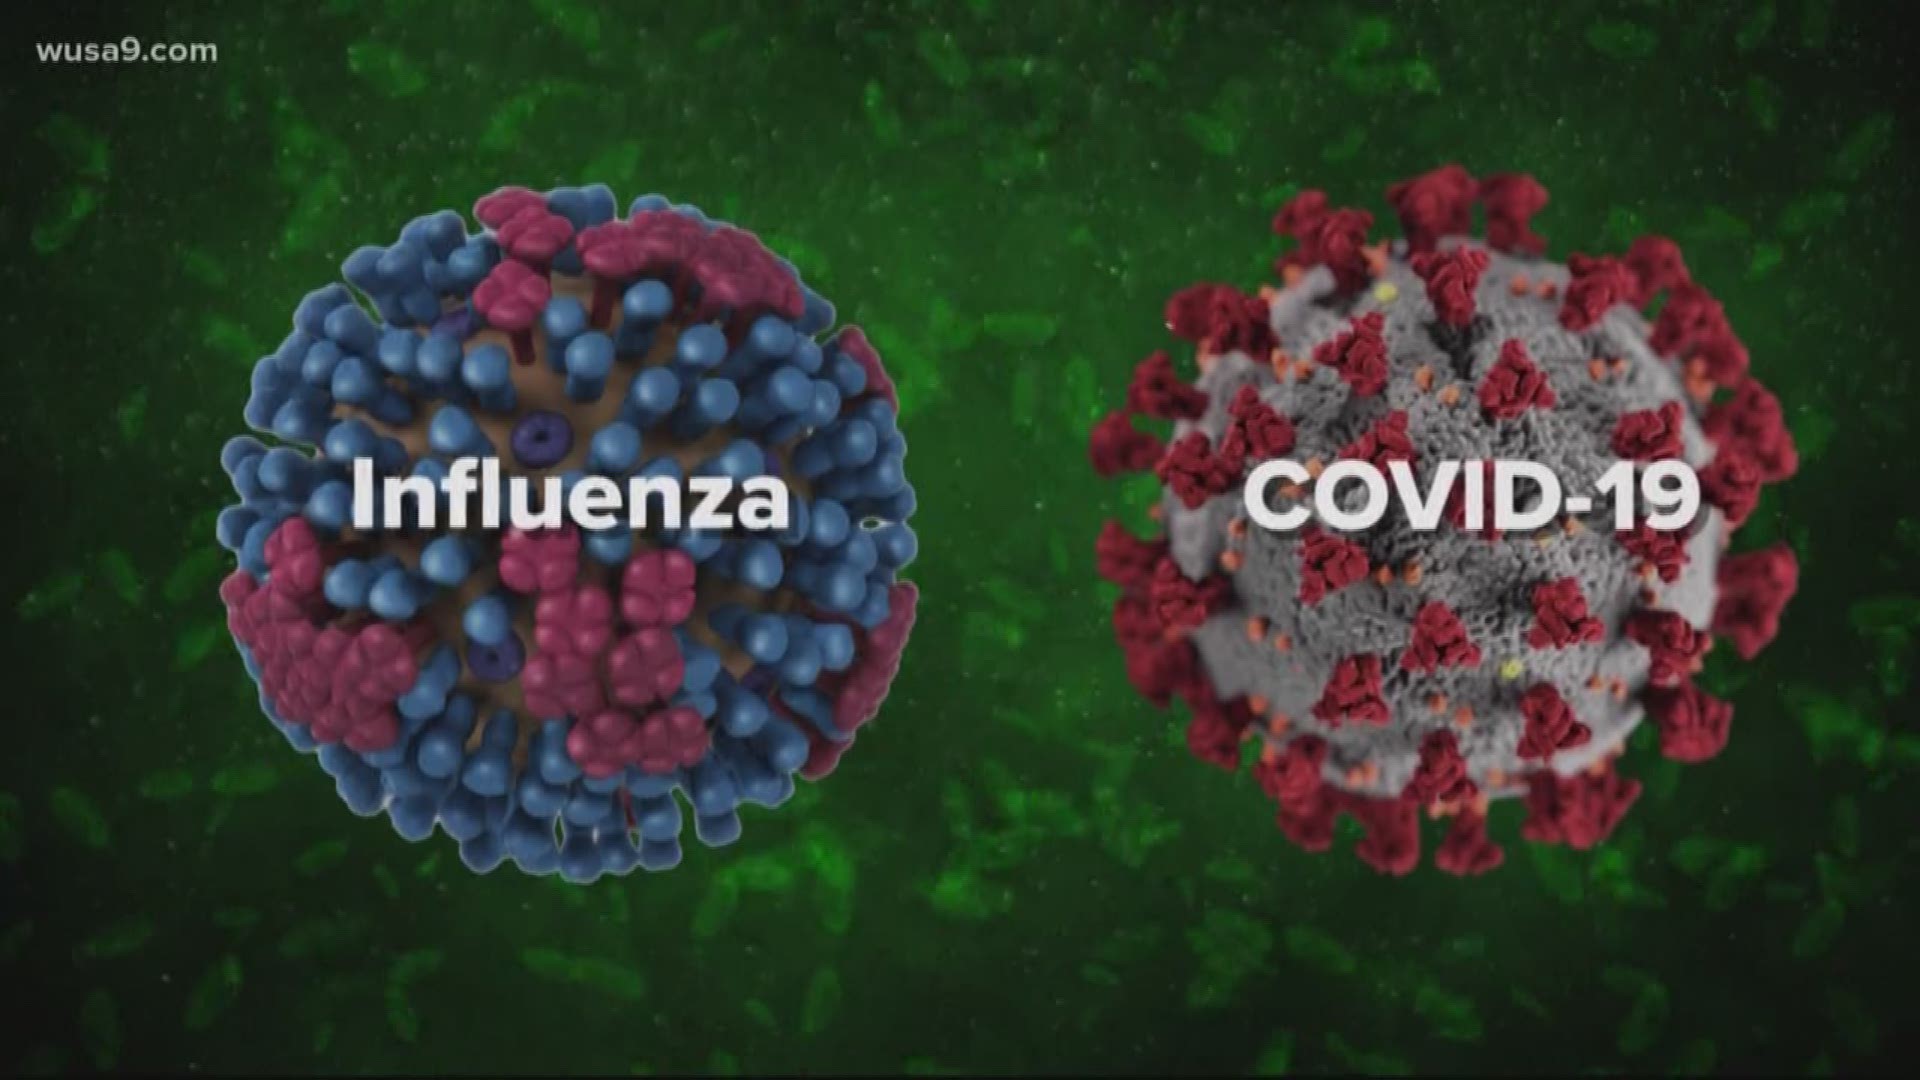 You can still get coronavirus if you have the flu. Everyone needs to take the same precautions.